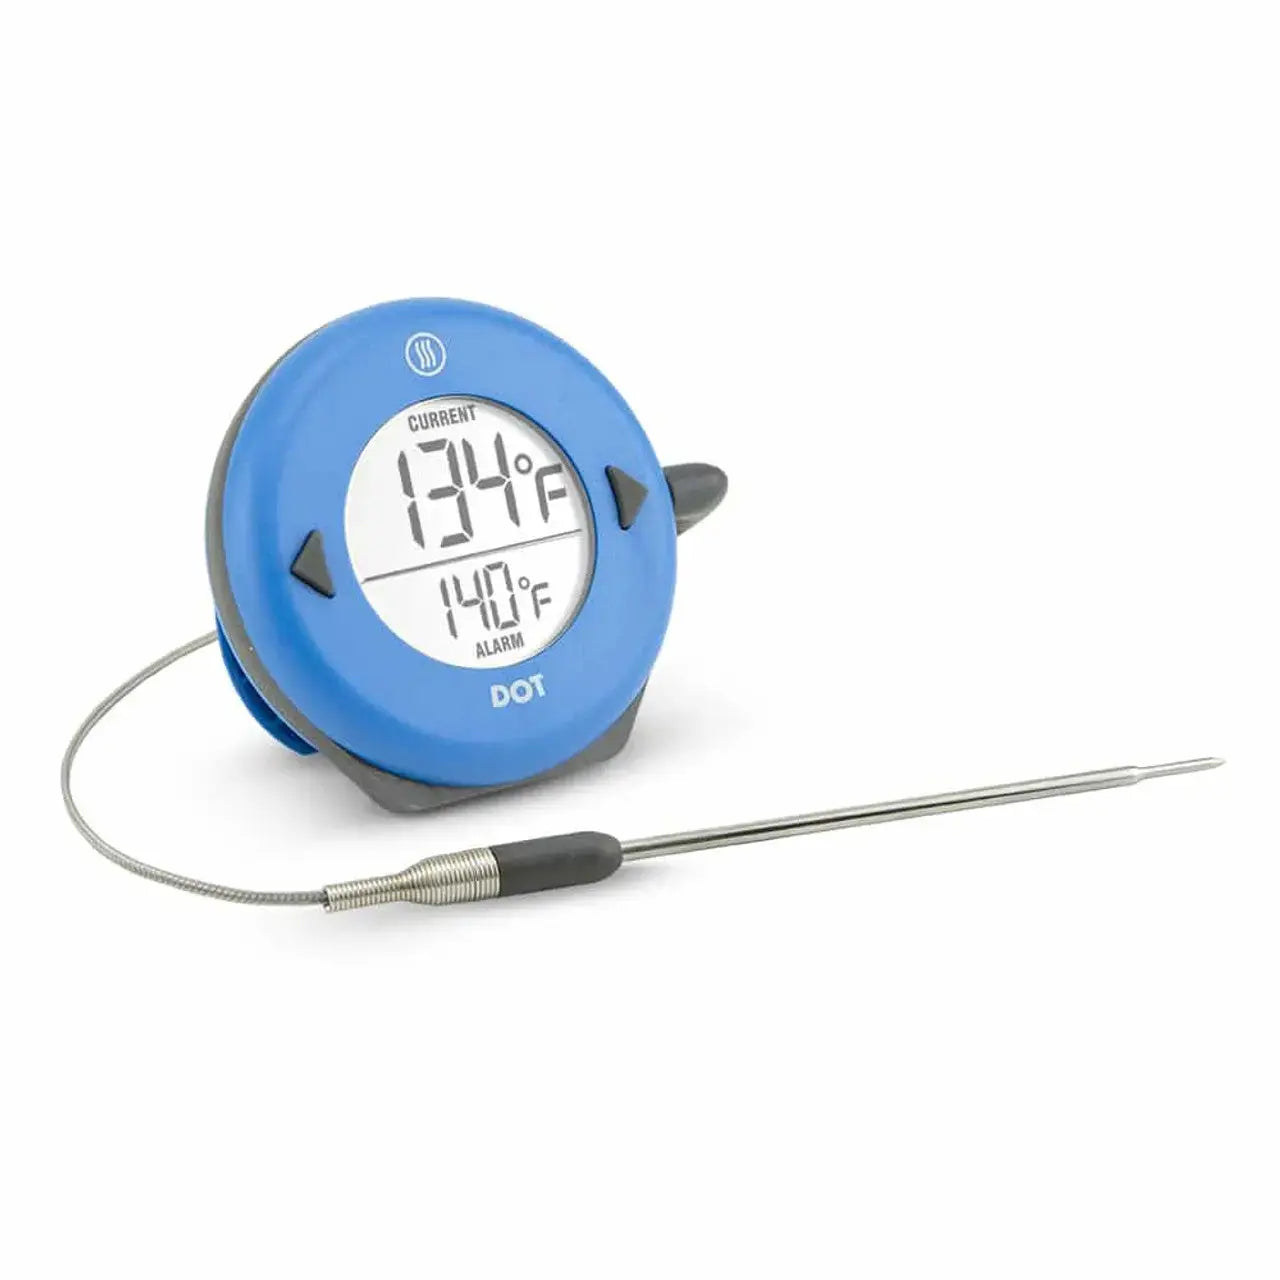 Thermoworks DOT® Simple Alarm Thermometer - Blue THERMOWORKS